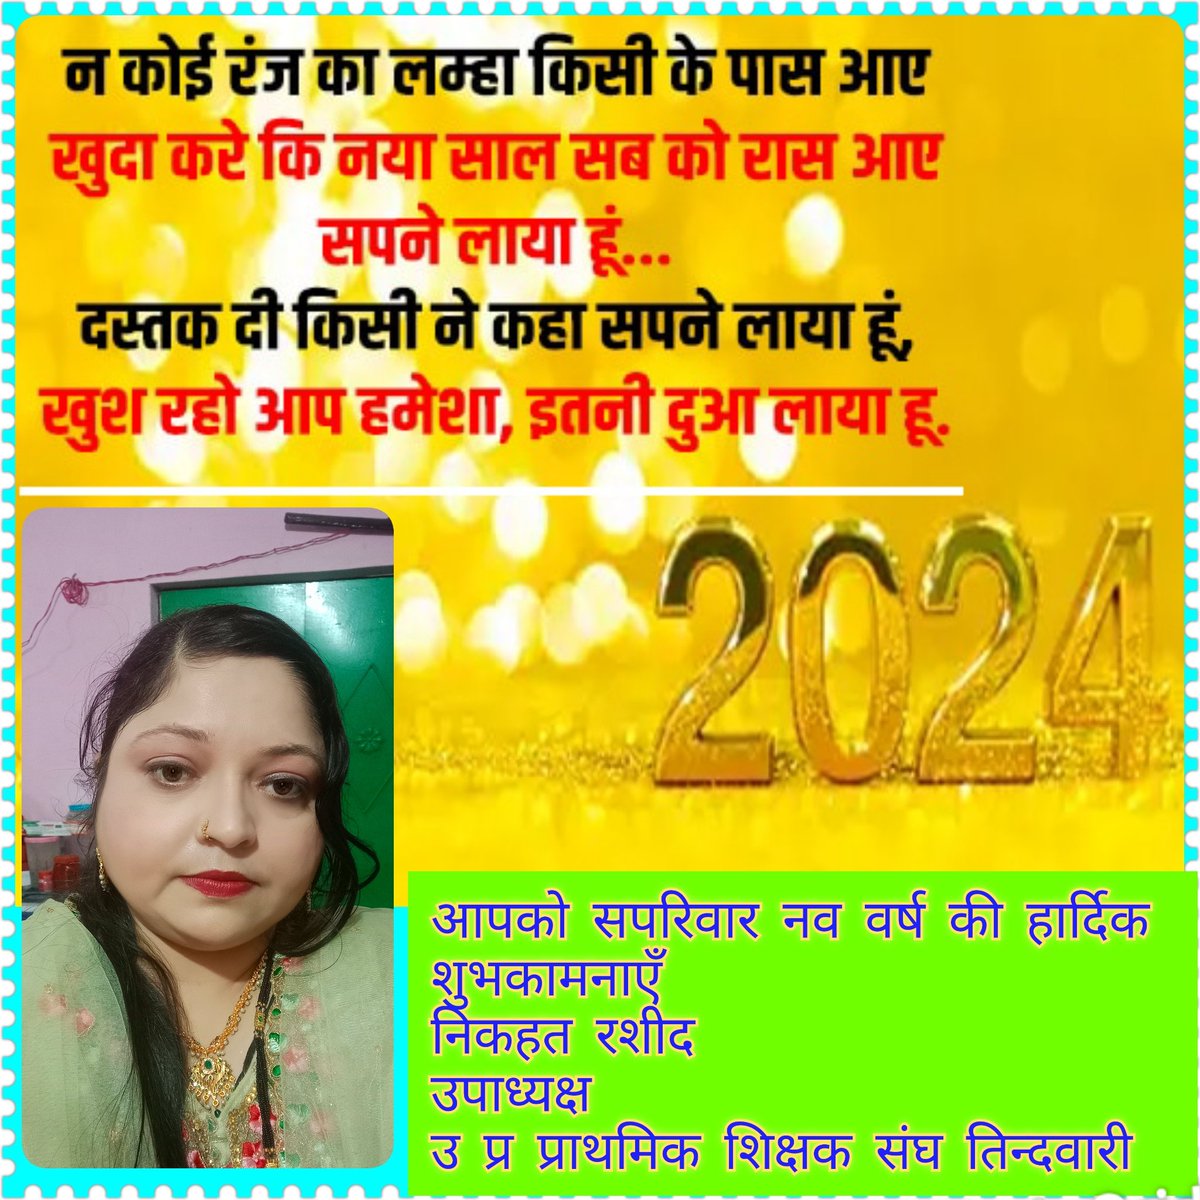 Happy new year to all